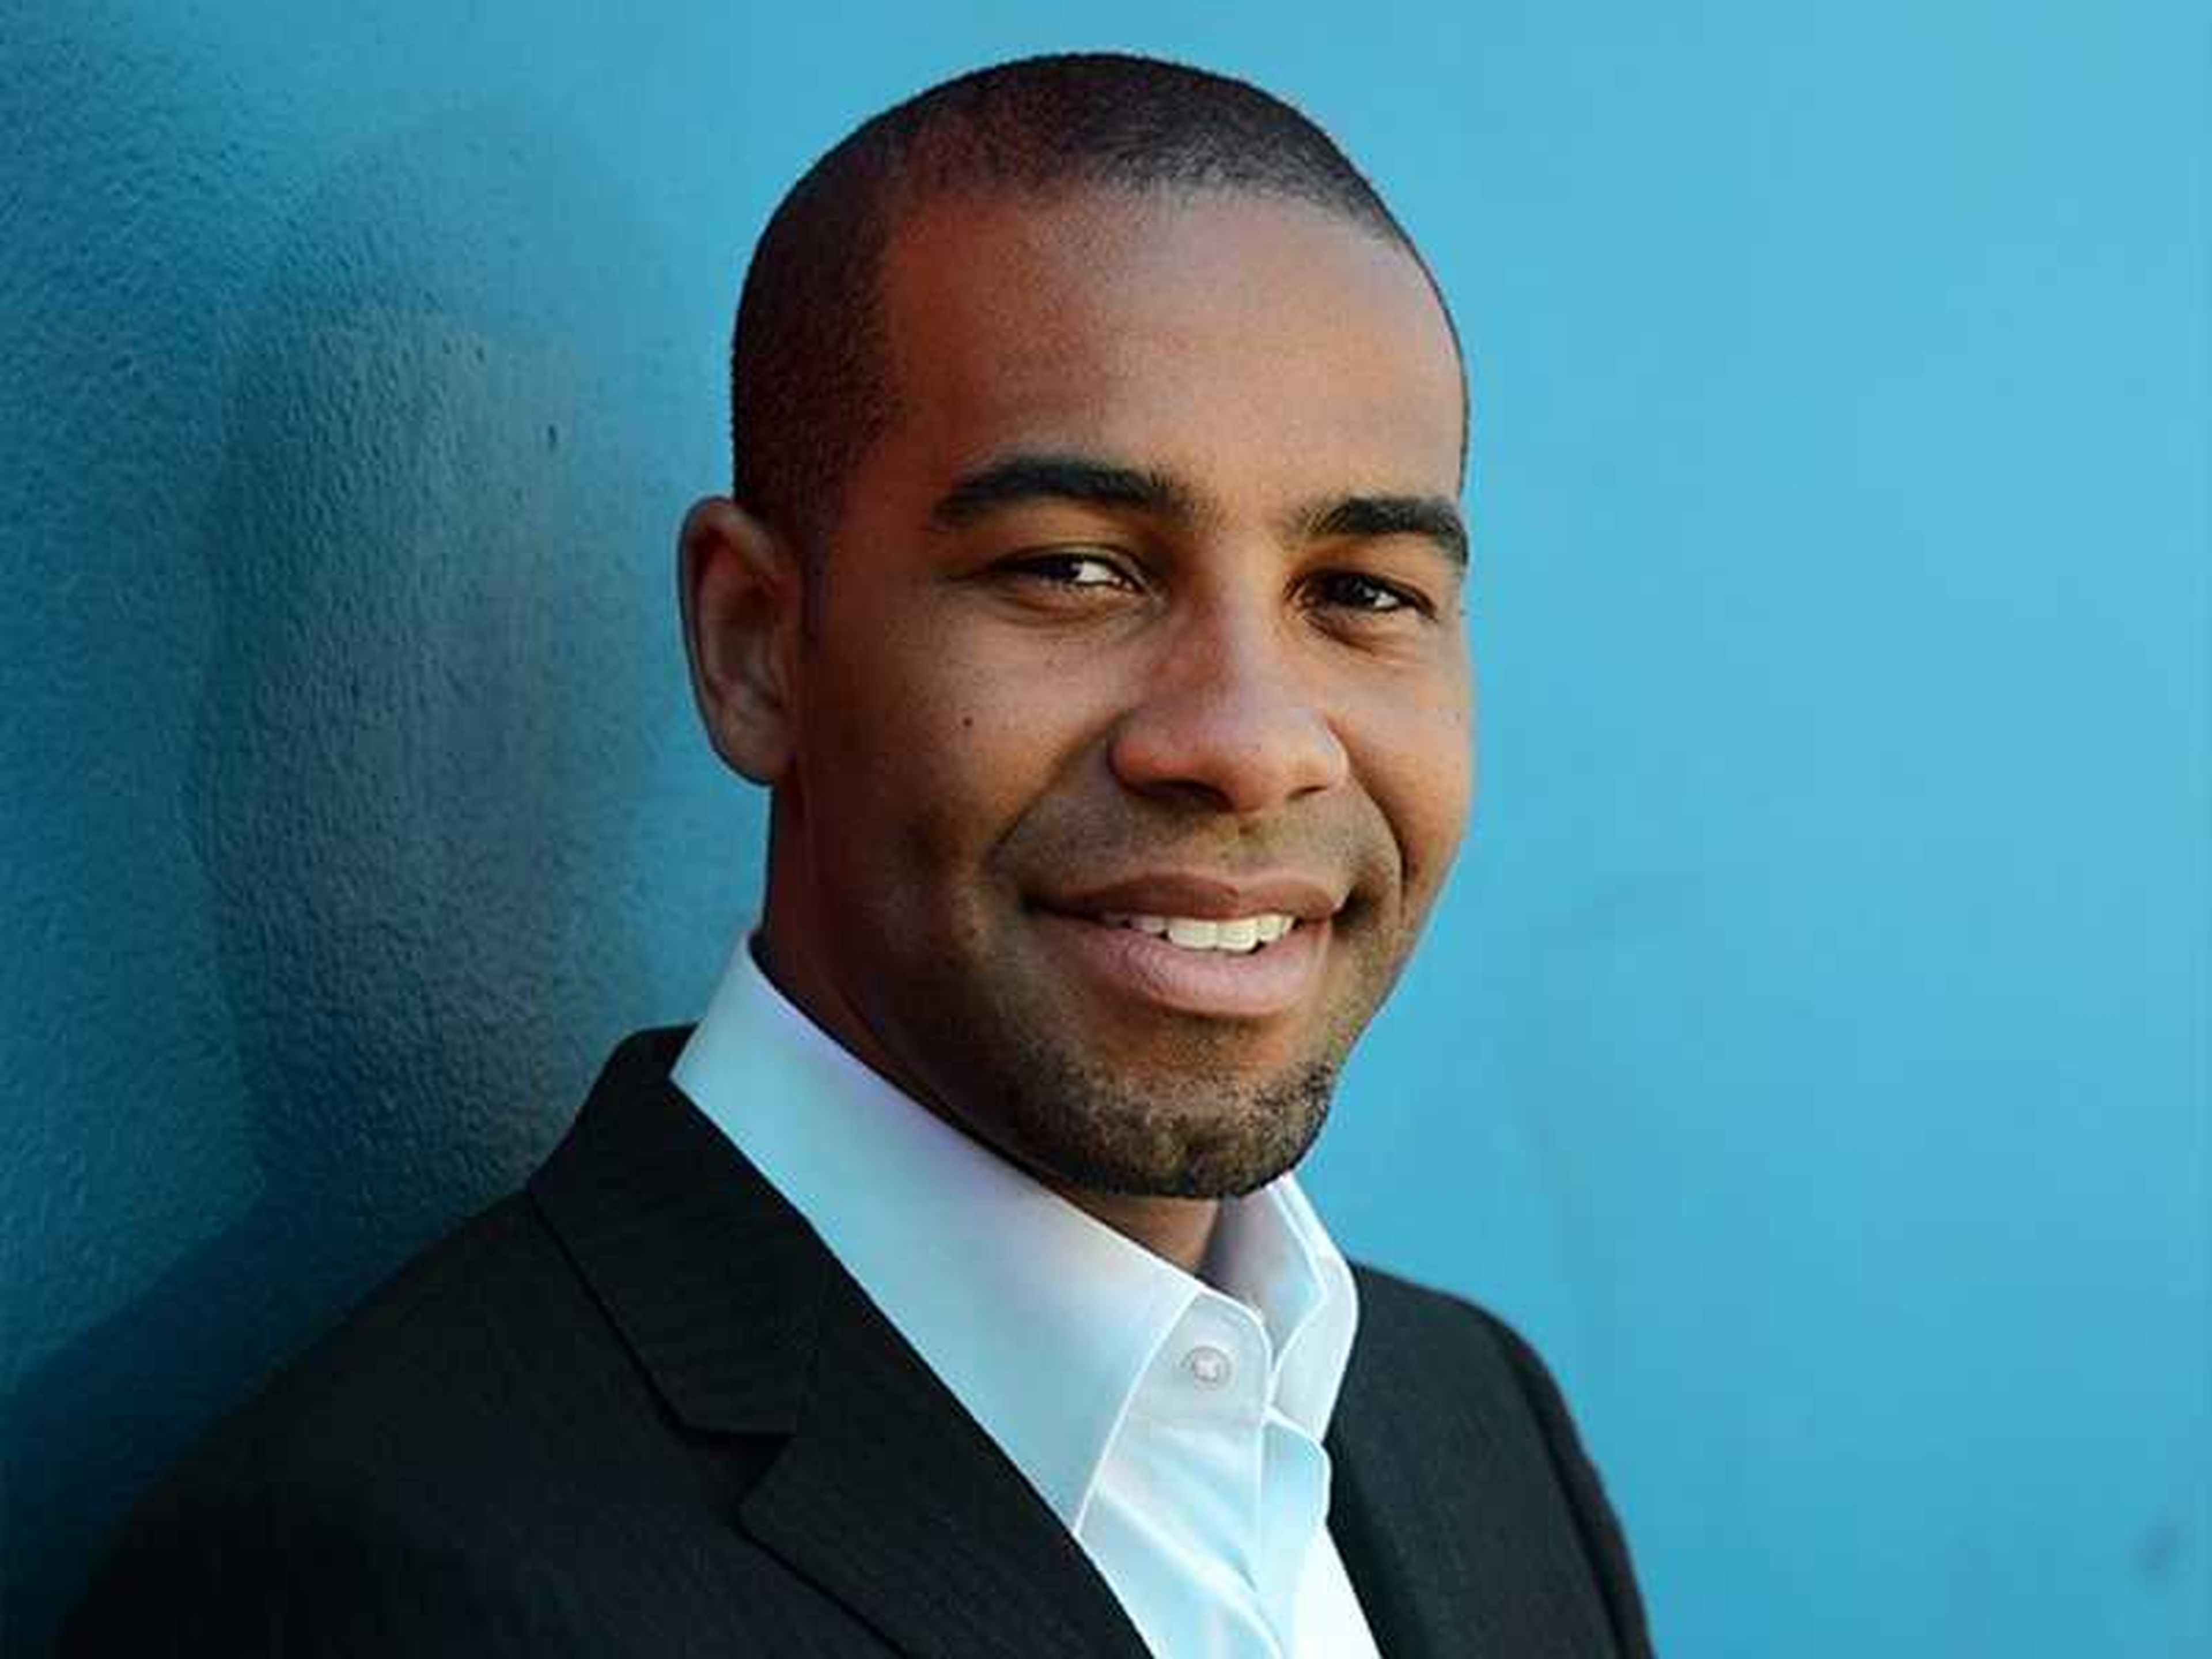 Michael Peggs, founder and chief content creator of Marccx Media